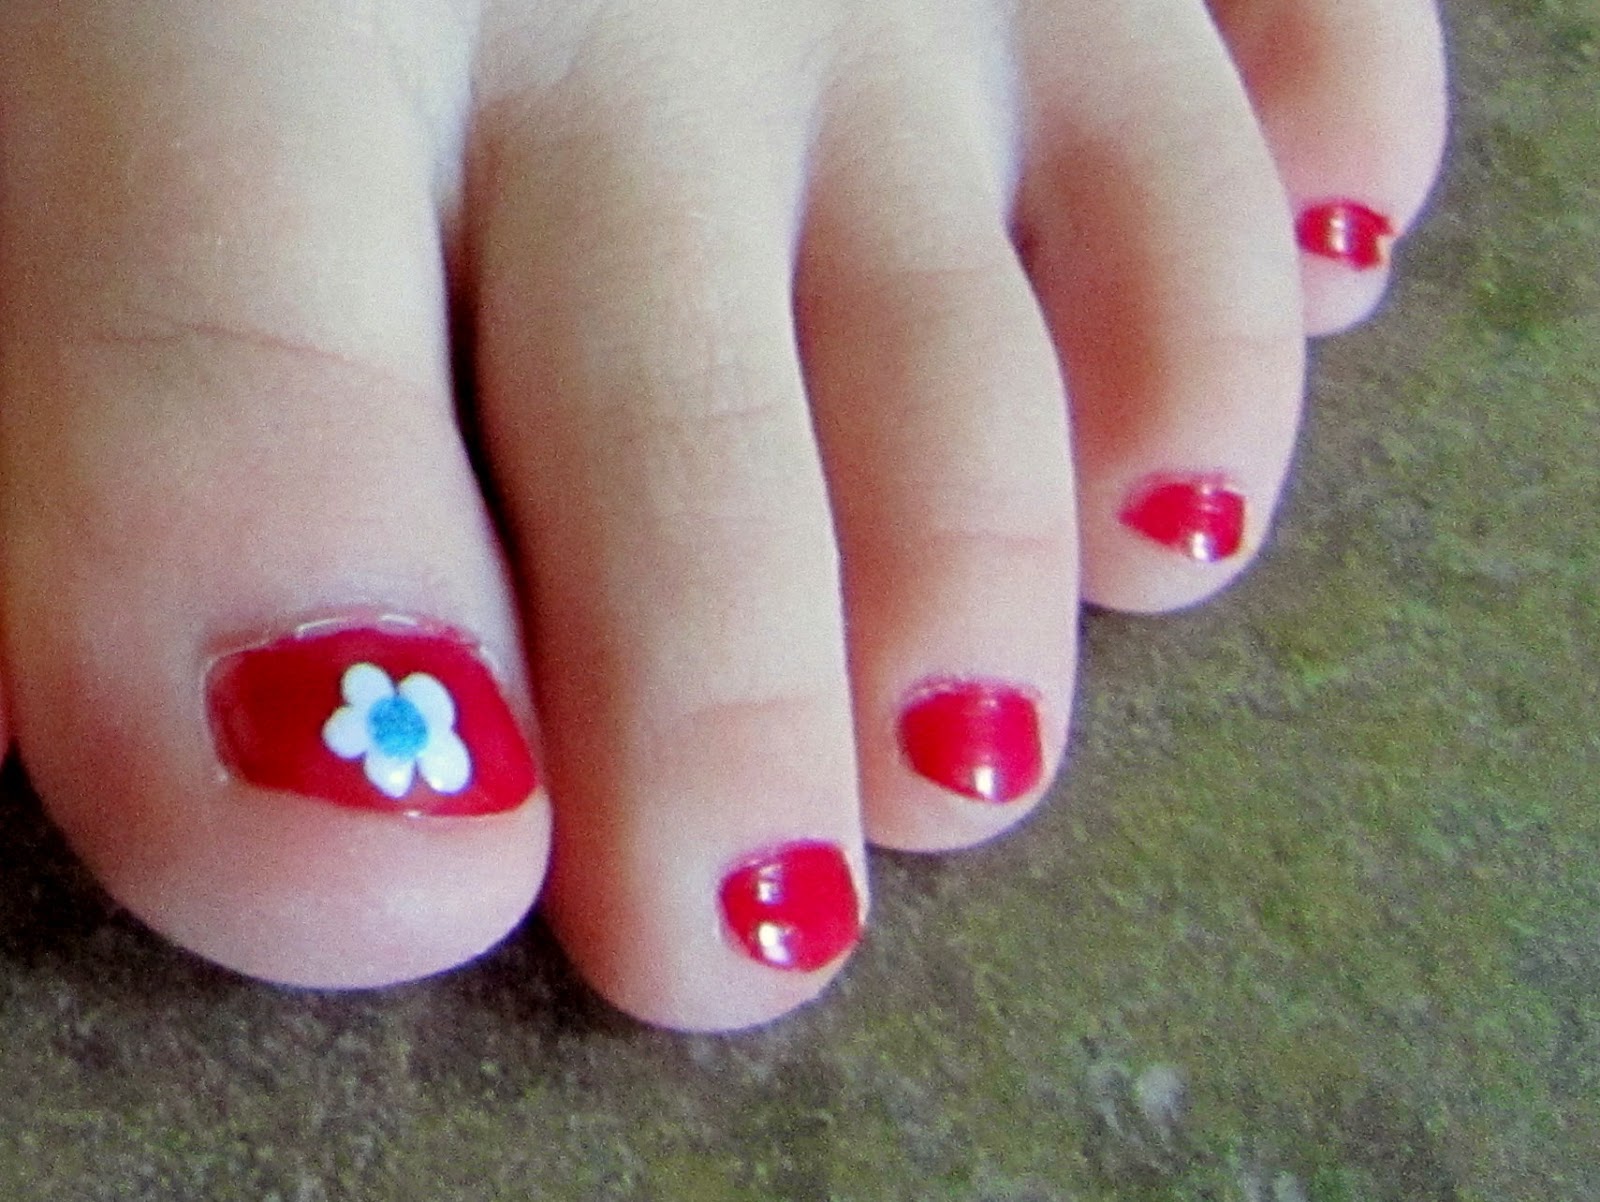 Pinning with Purpose: 4th of July Flower Toenails